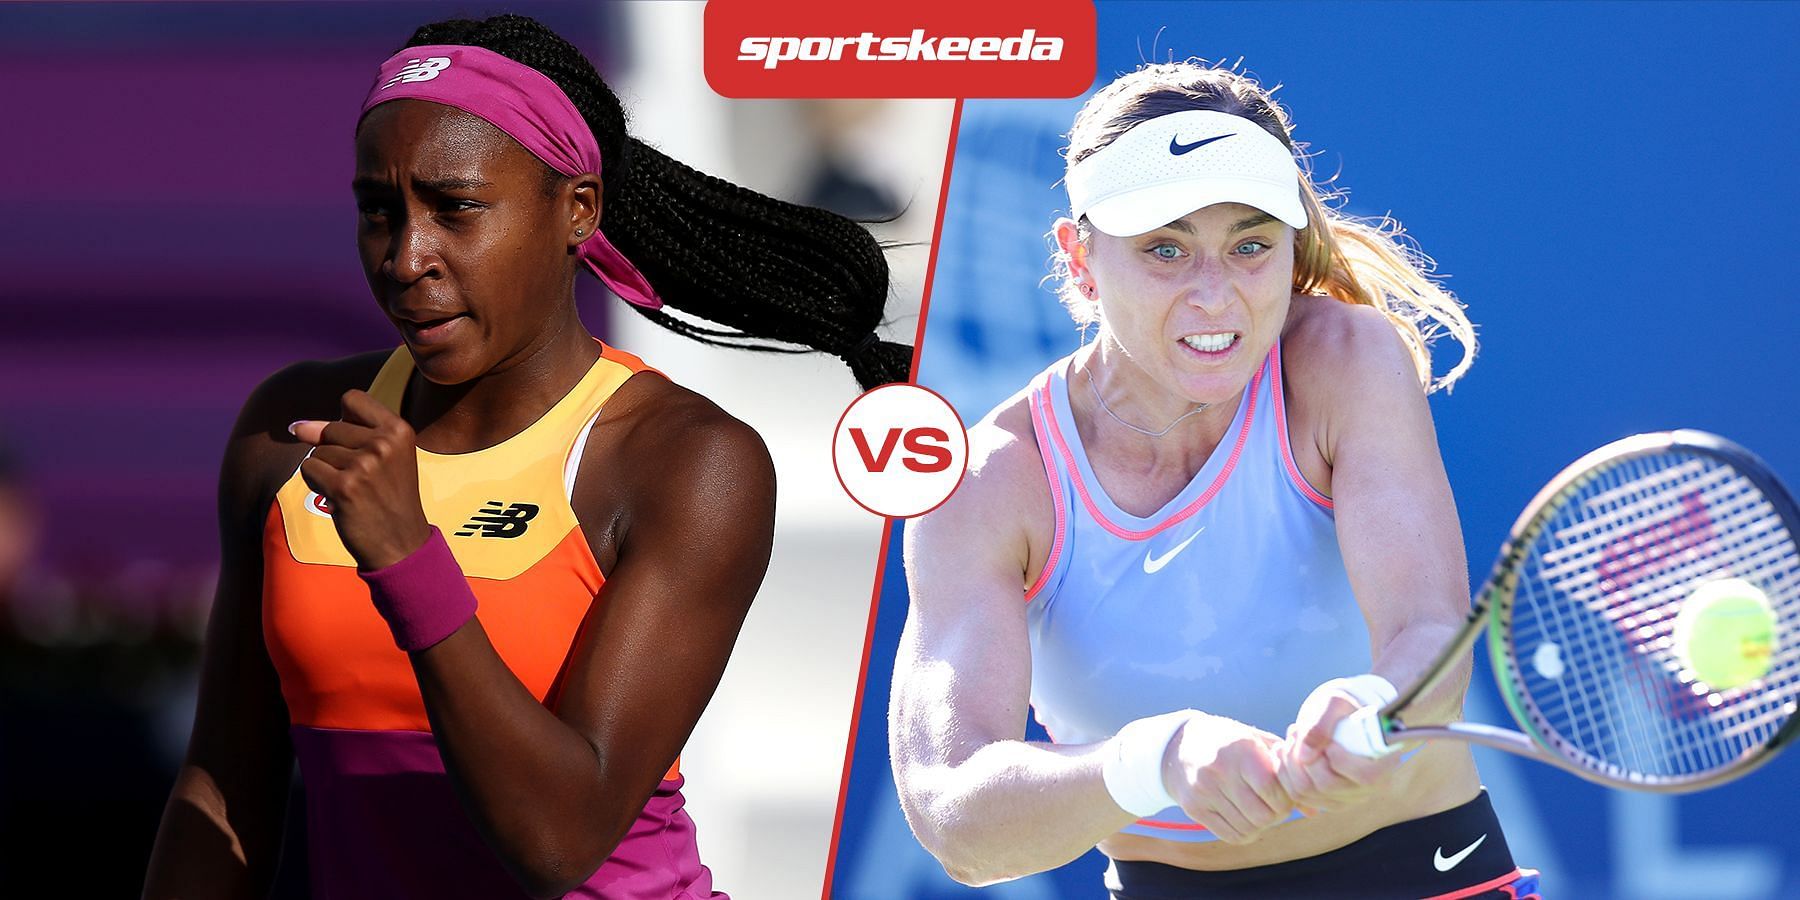 Coco Gauff will face Paula Badosa in the quarterfinals of the Silicon Valley Classic